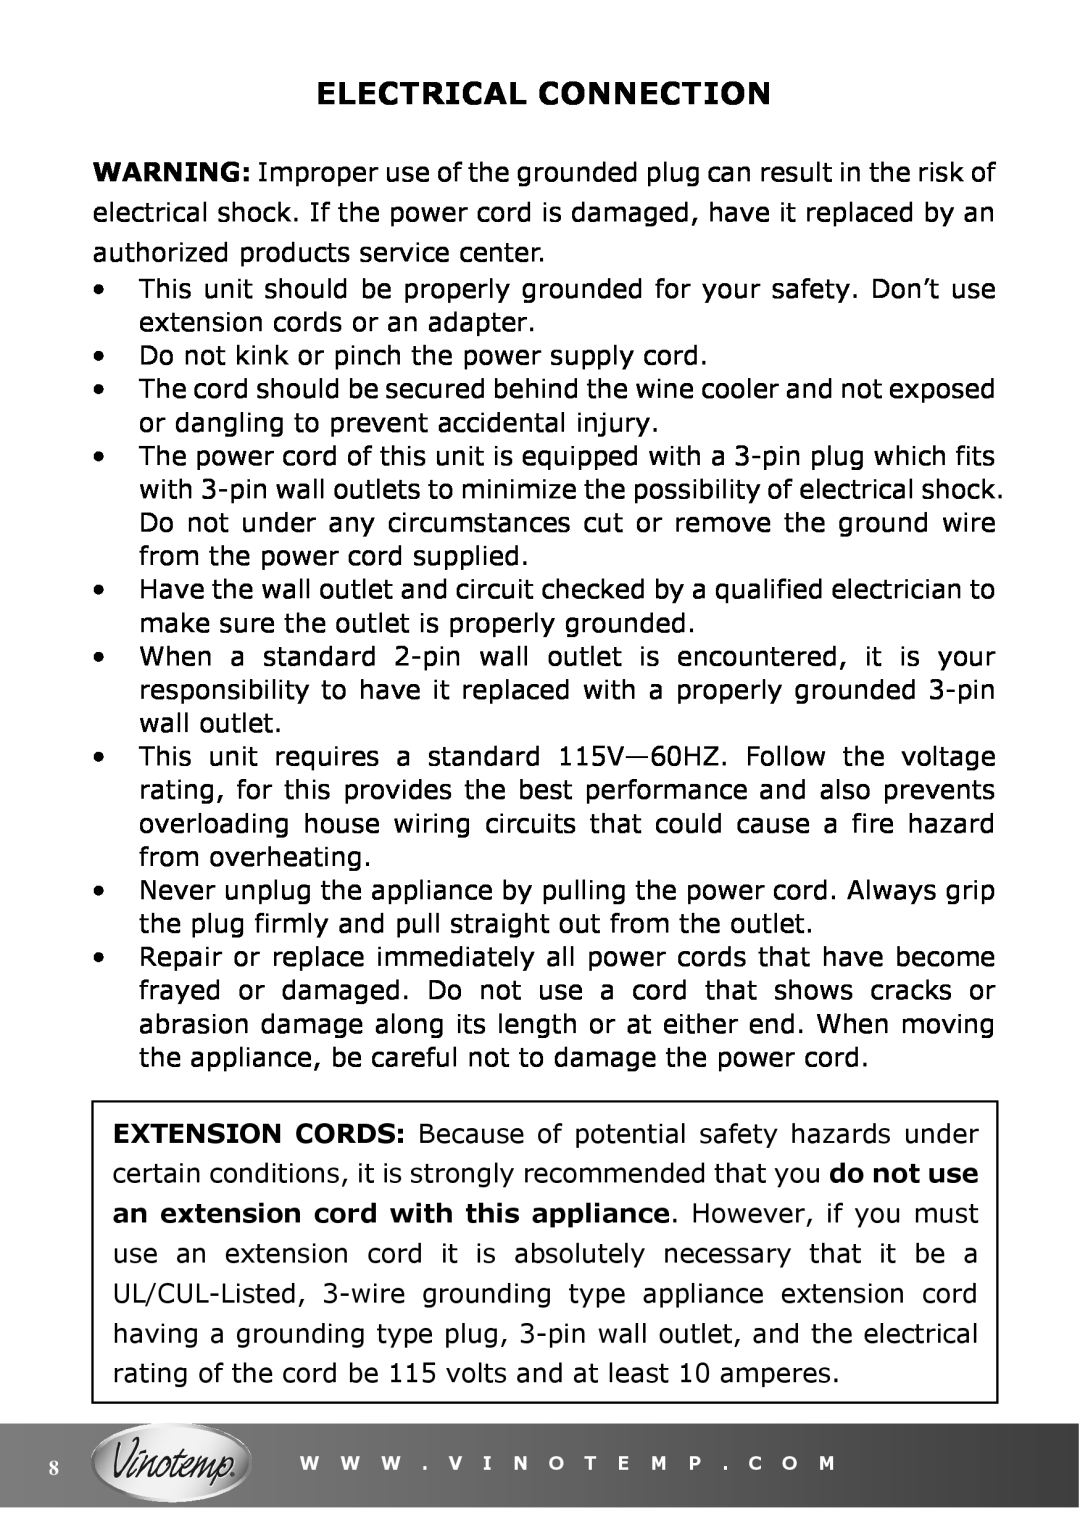 Vinotemp VT-36 owner manual Electrical Connection 